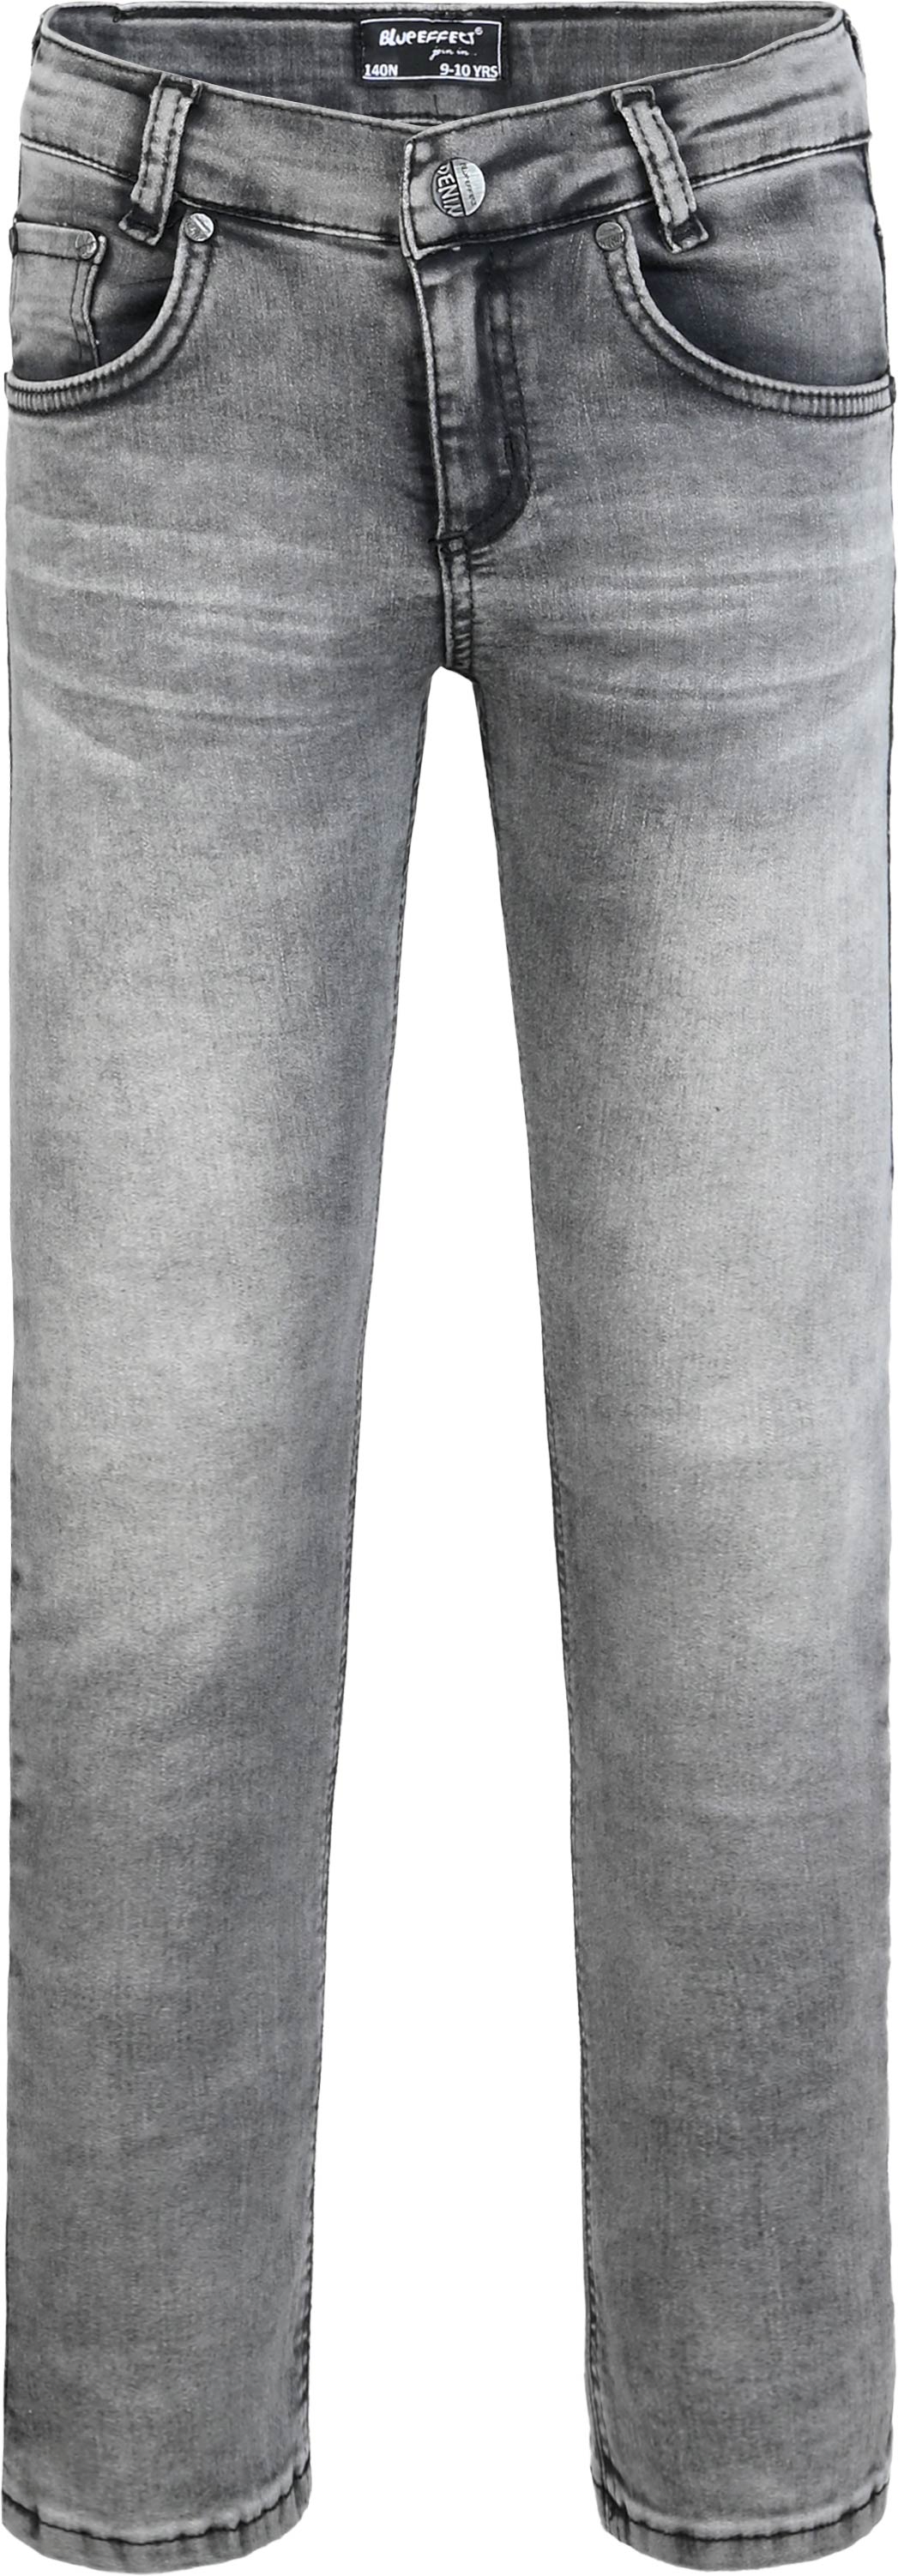 2726-NOS Boys Jeans Relaxed Fit, Ultrastretch, available in Slim,Normal